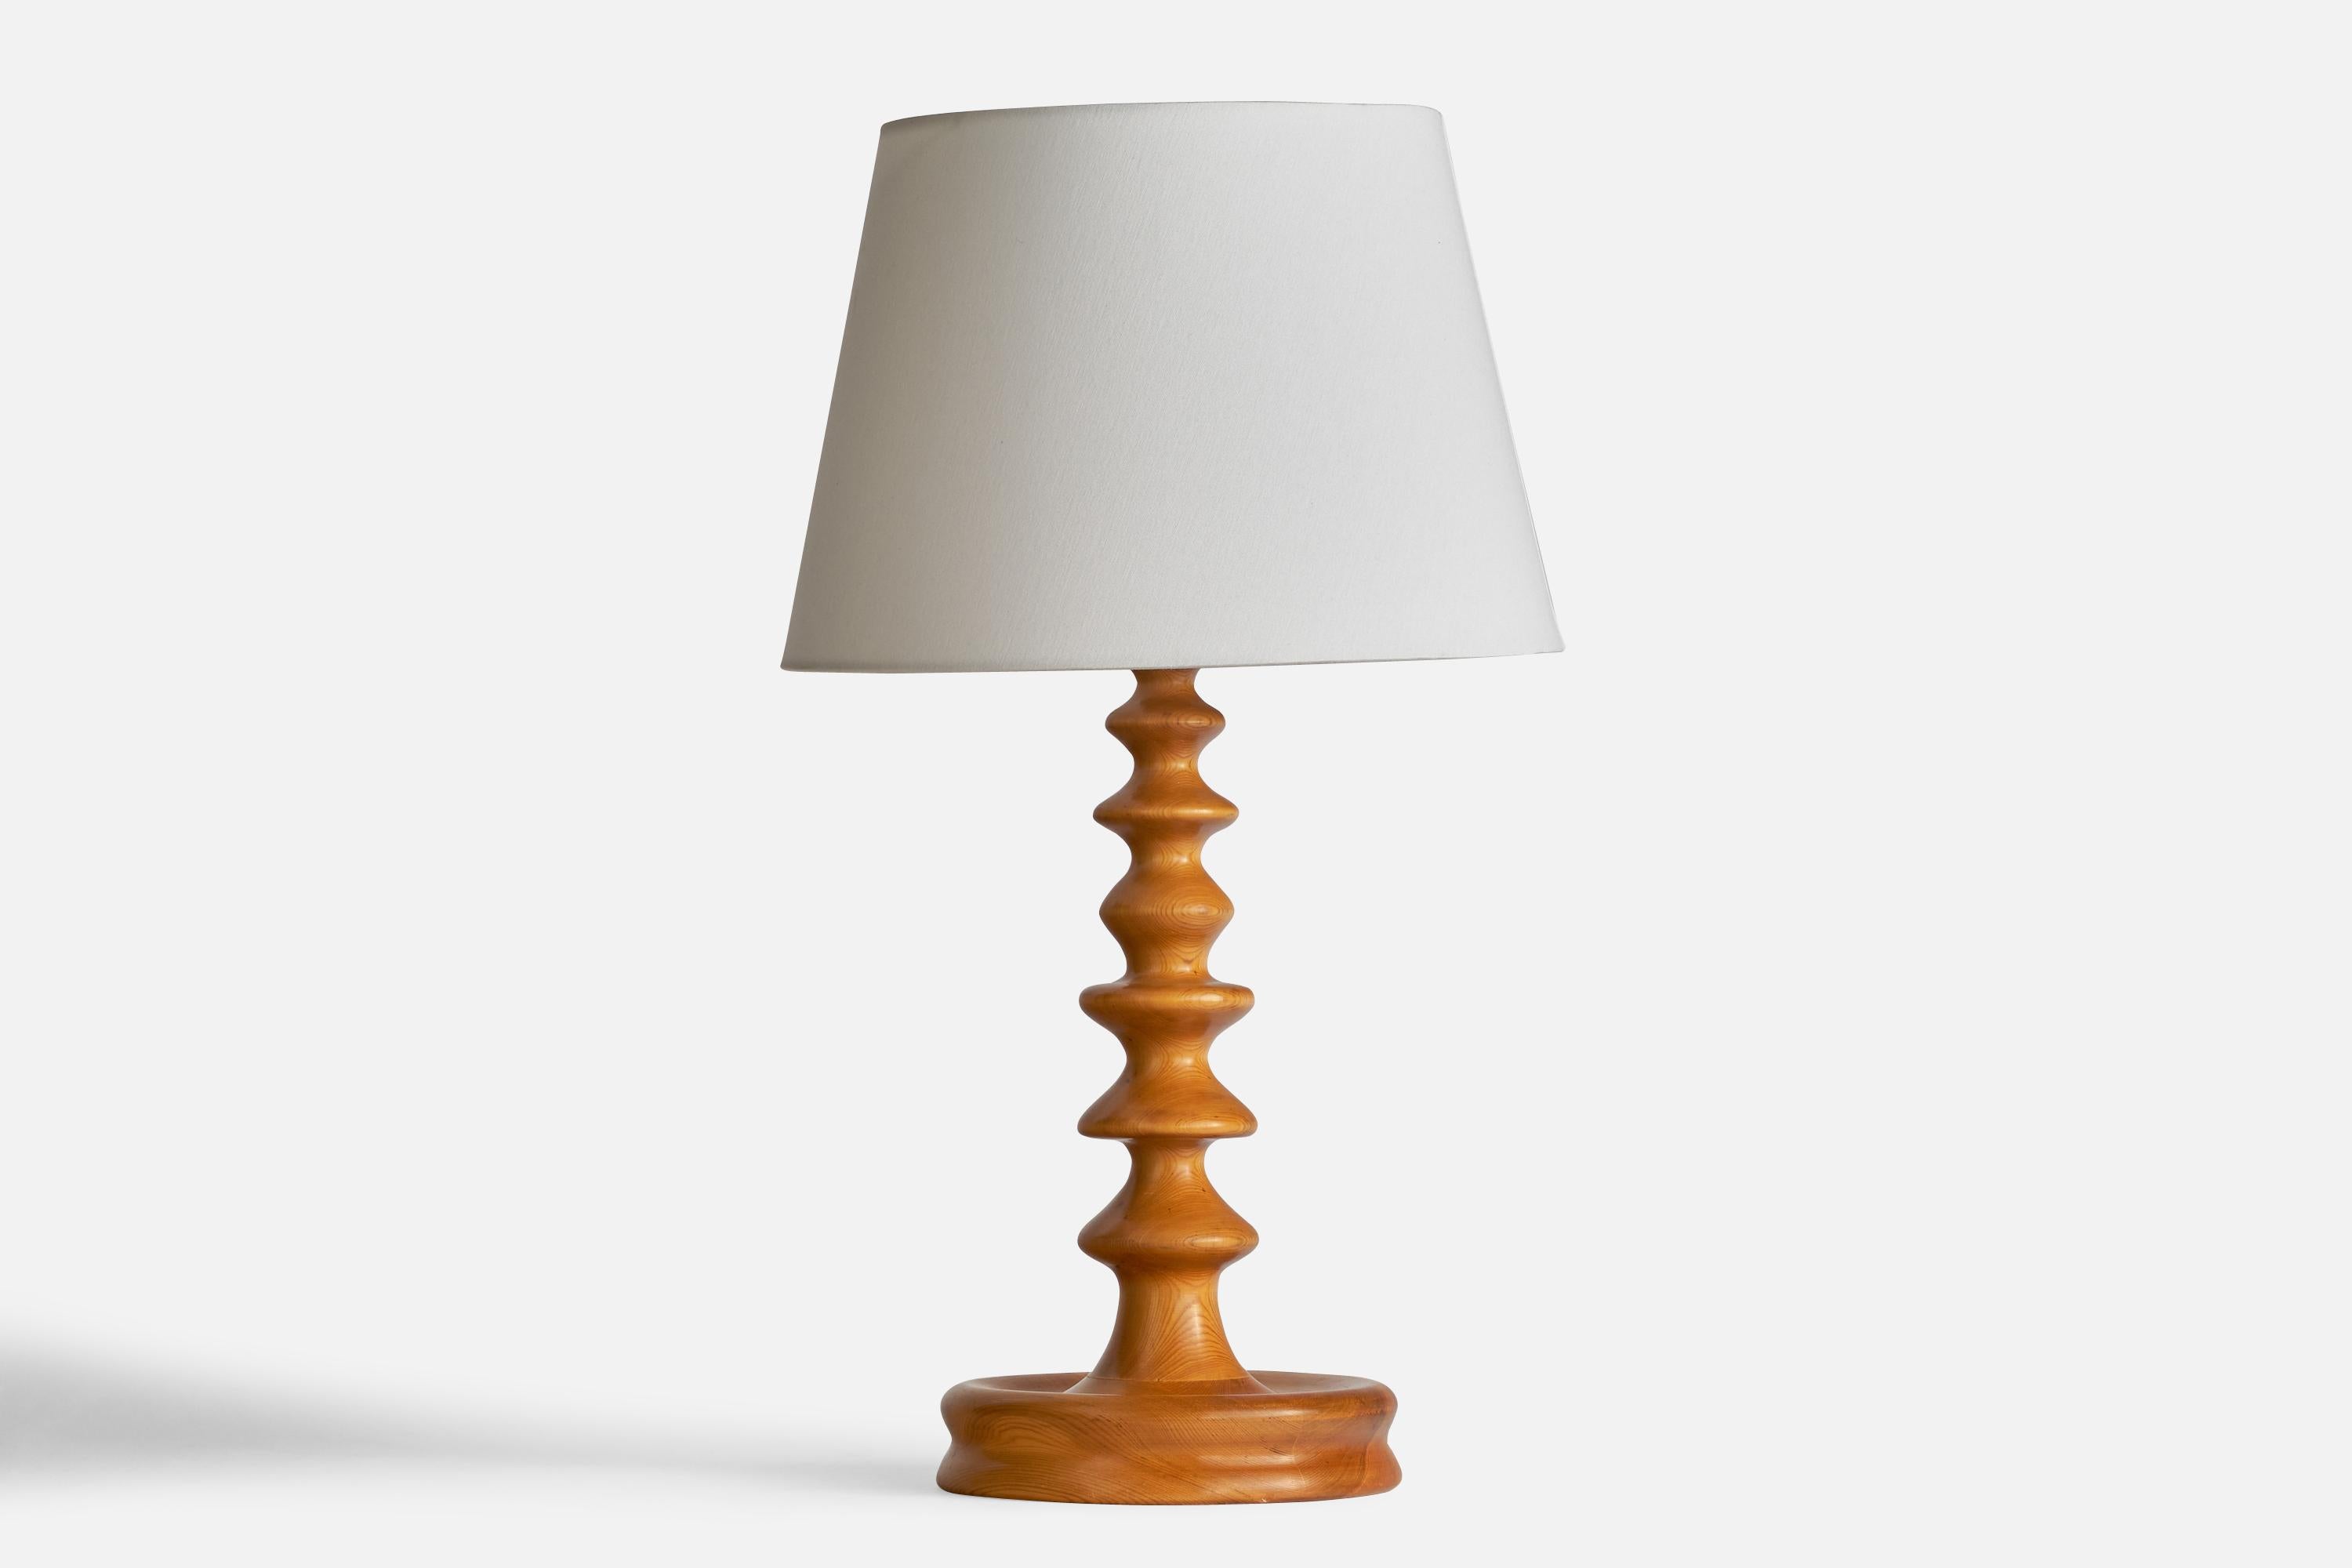 A freeform pine table lamp designed and produced in Sweden, c. 1960s.

Dimensions of Lamp (inches): 19” H x 8” Diameter
Dimensions of Shade (inches): 10